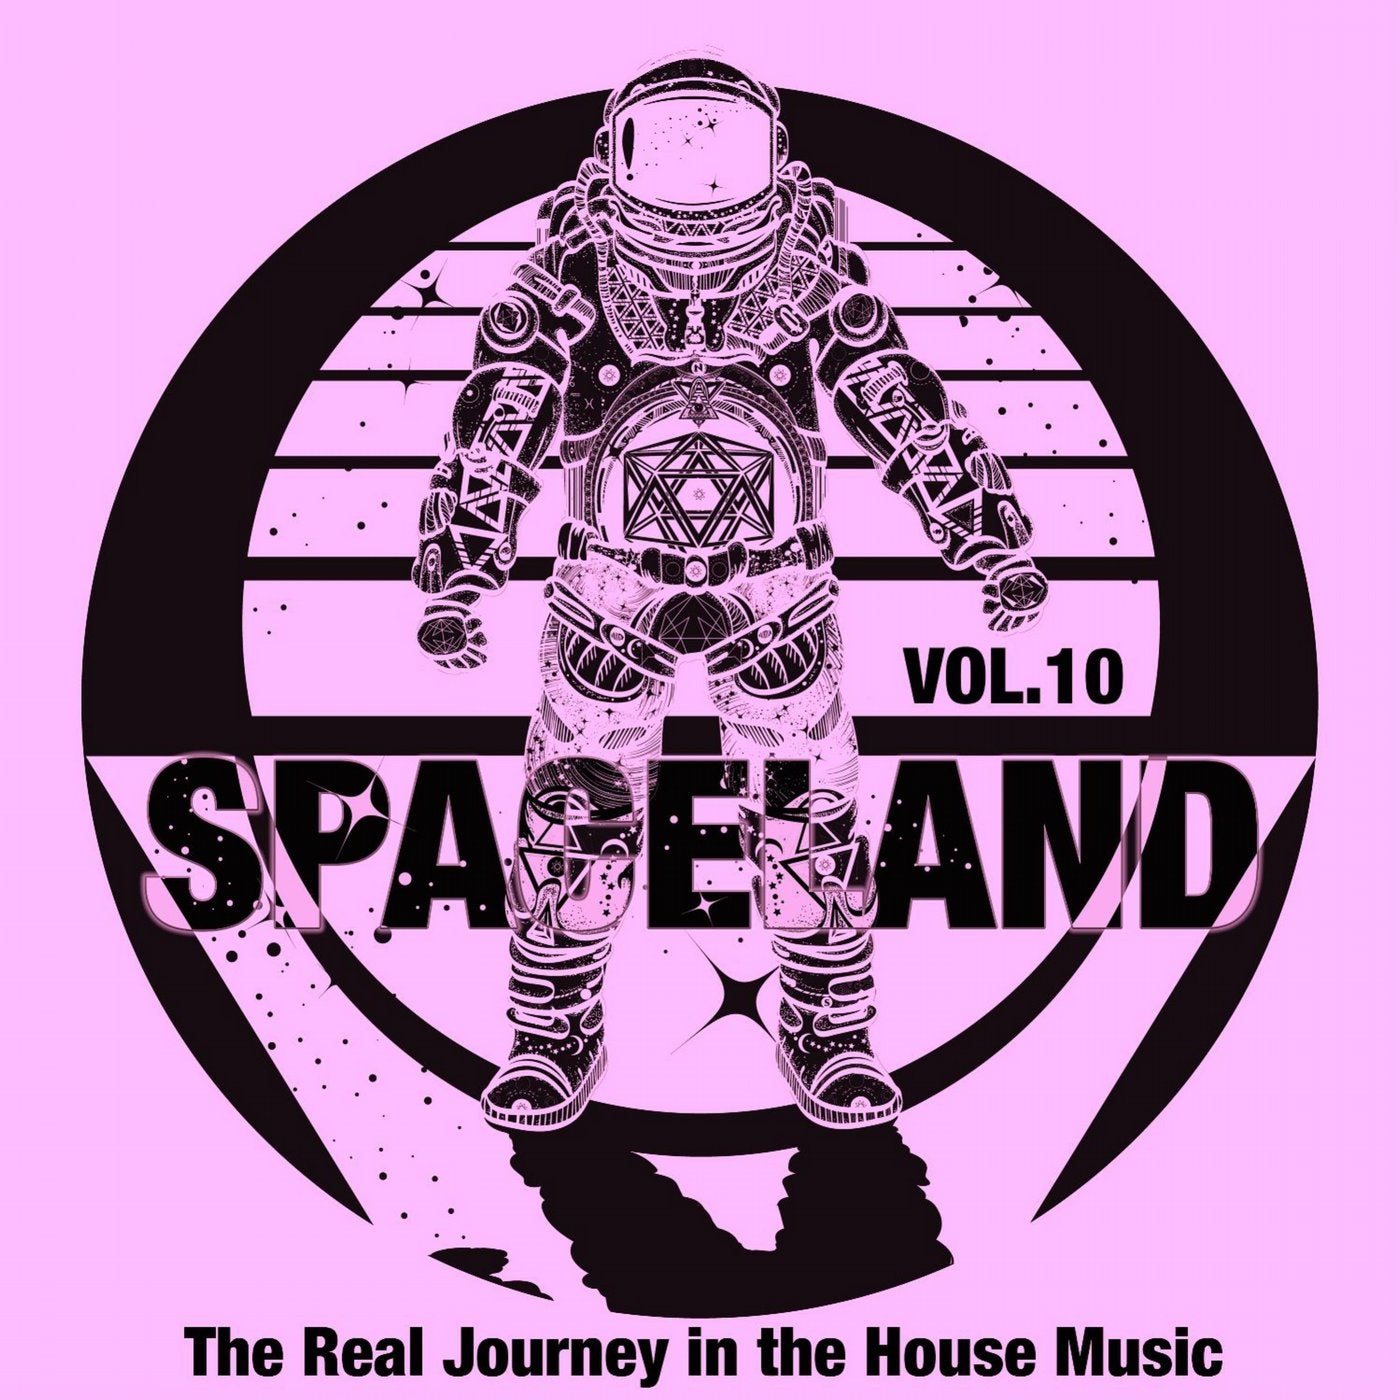 Spaceland, Vol. 10 (The Real Journey in the House Music)